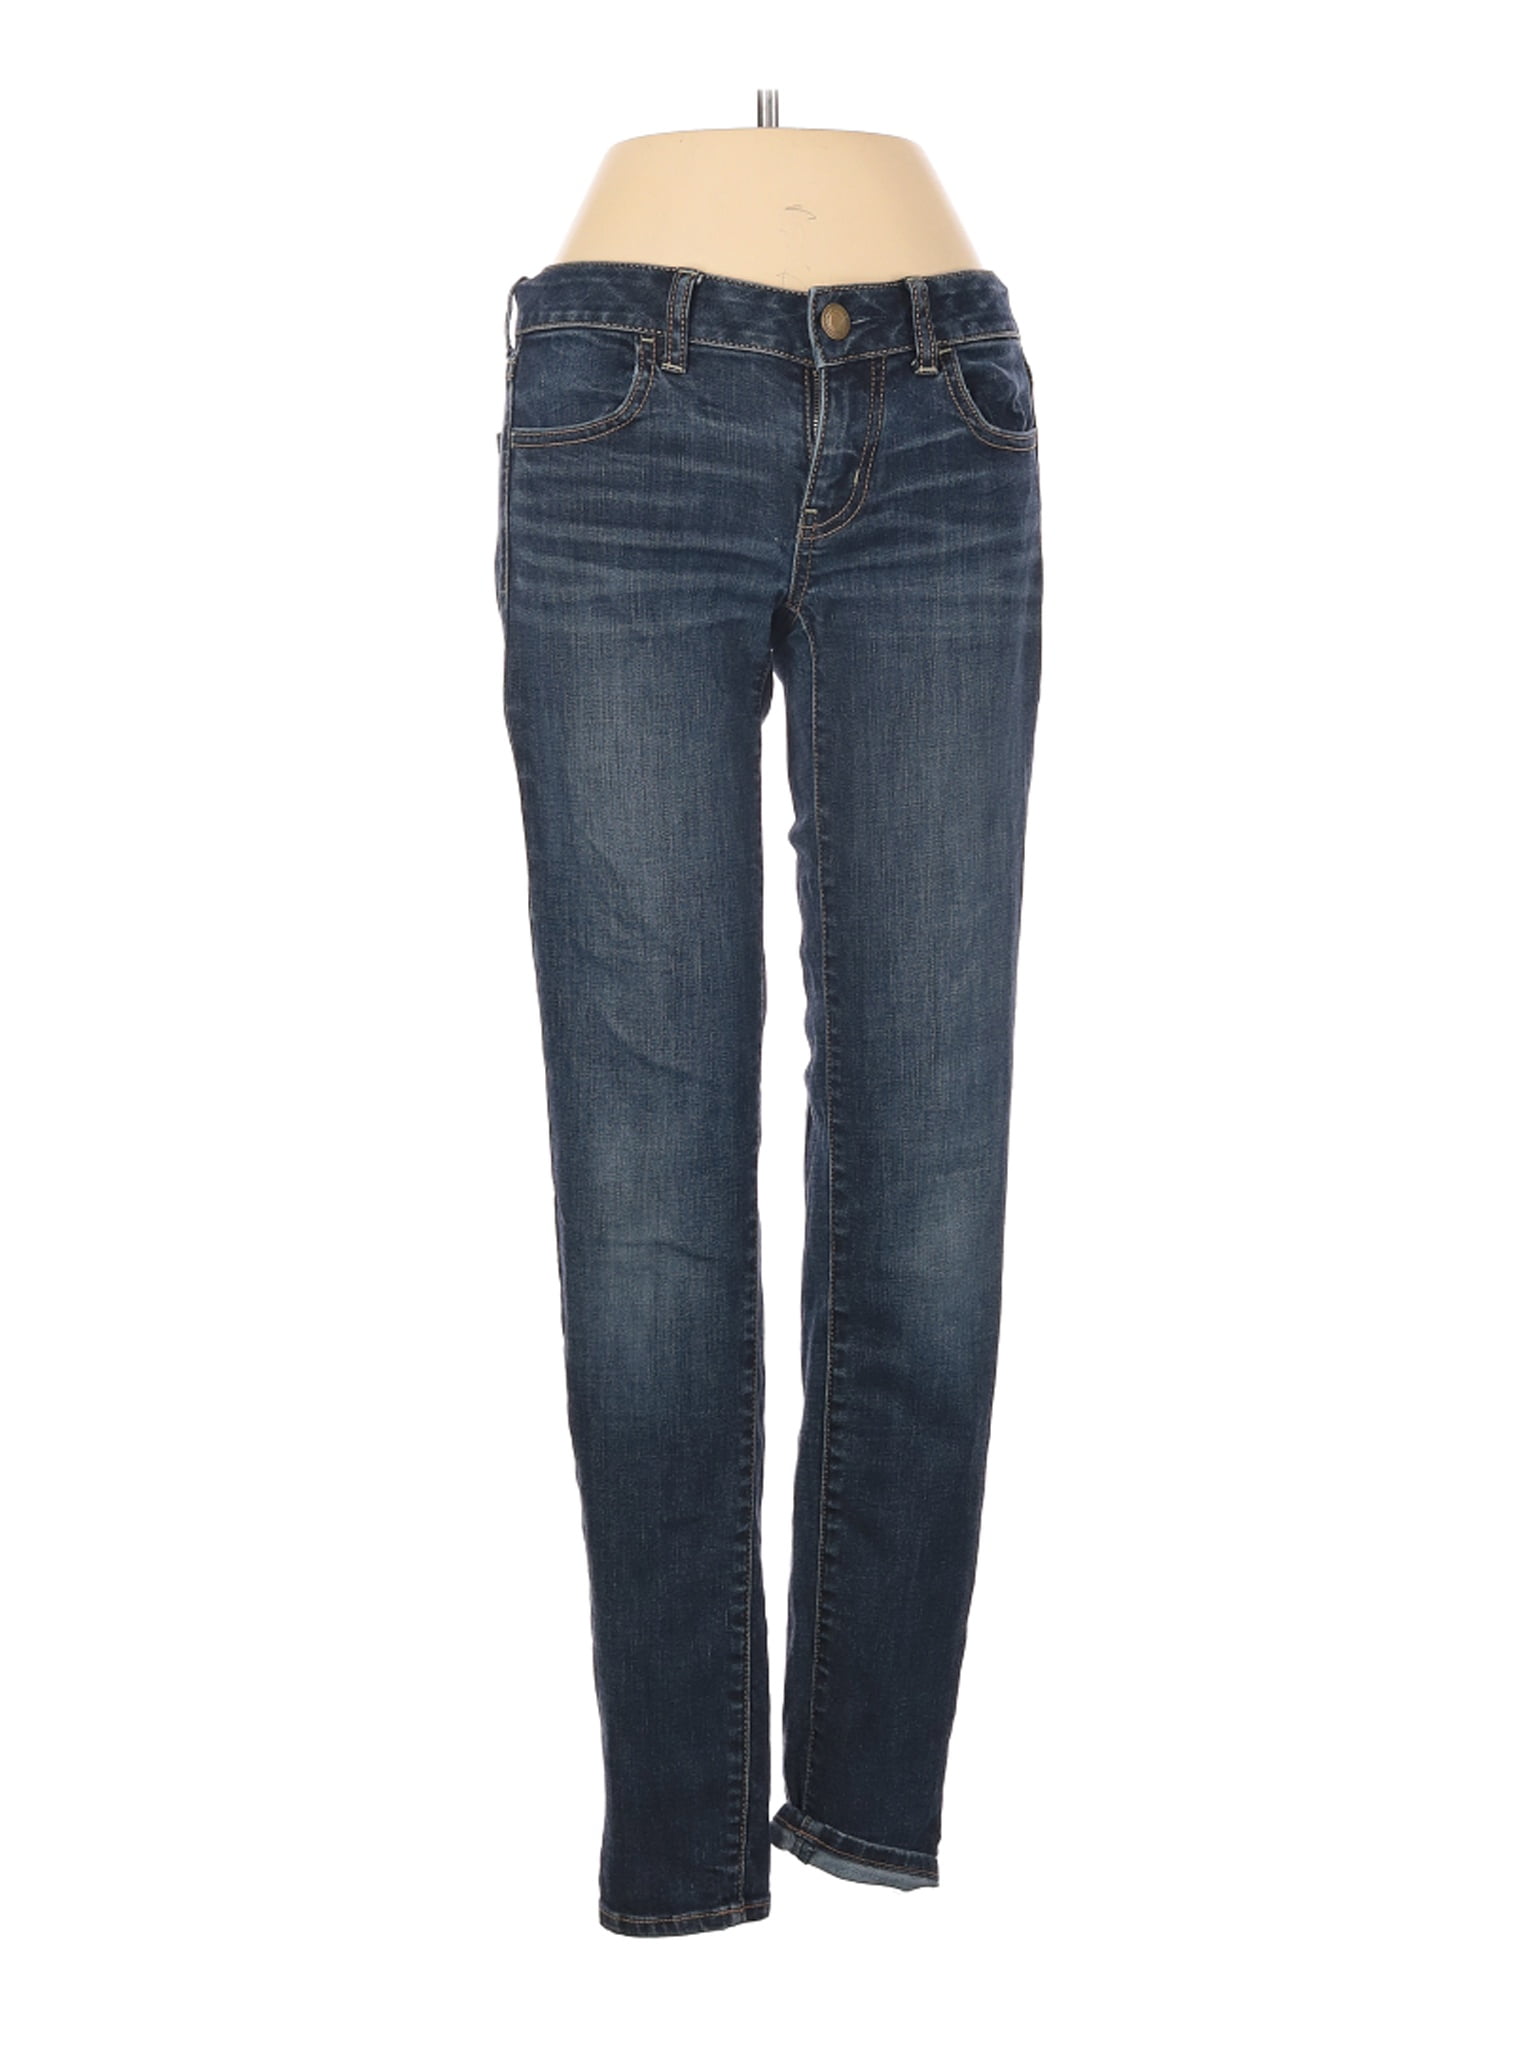 american eagle big and tall jeans